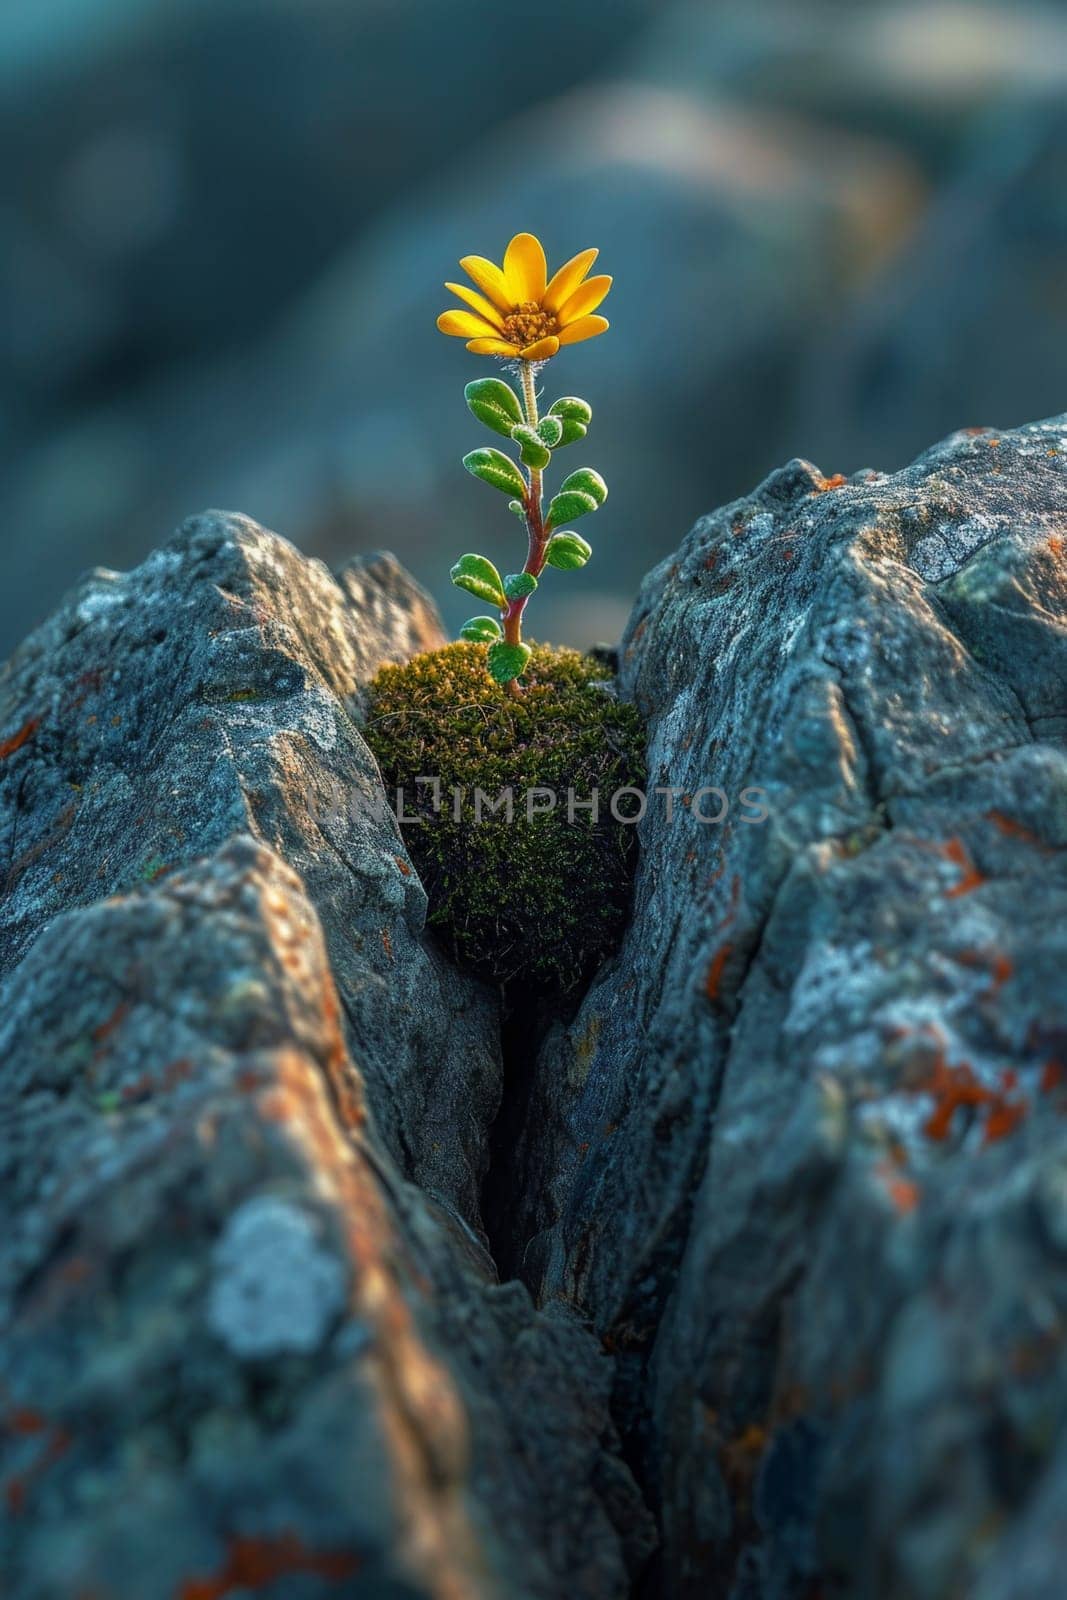 The sprout of the future tree makes its way through the rocky surface in the mountains. The concept of life and growth, despite the difficulties.